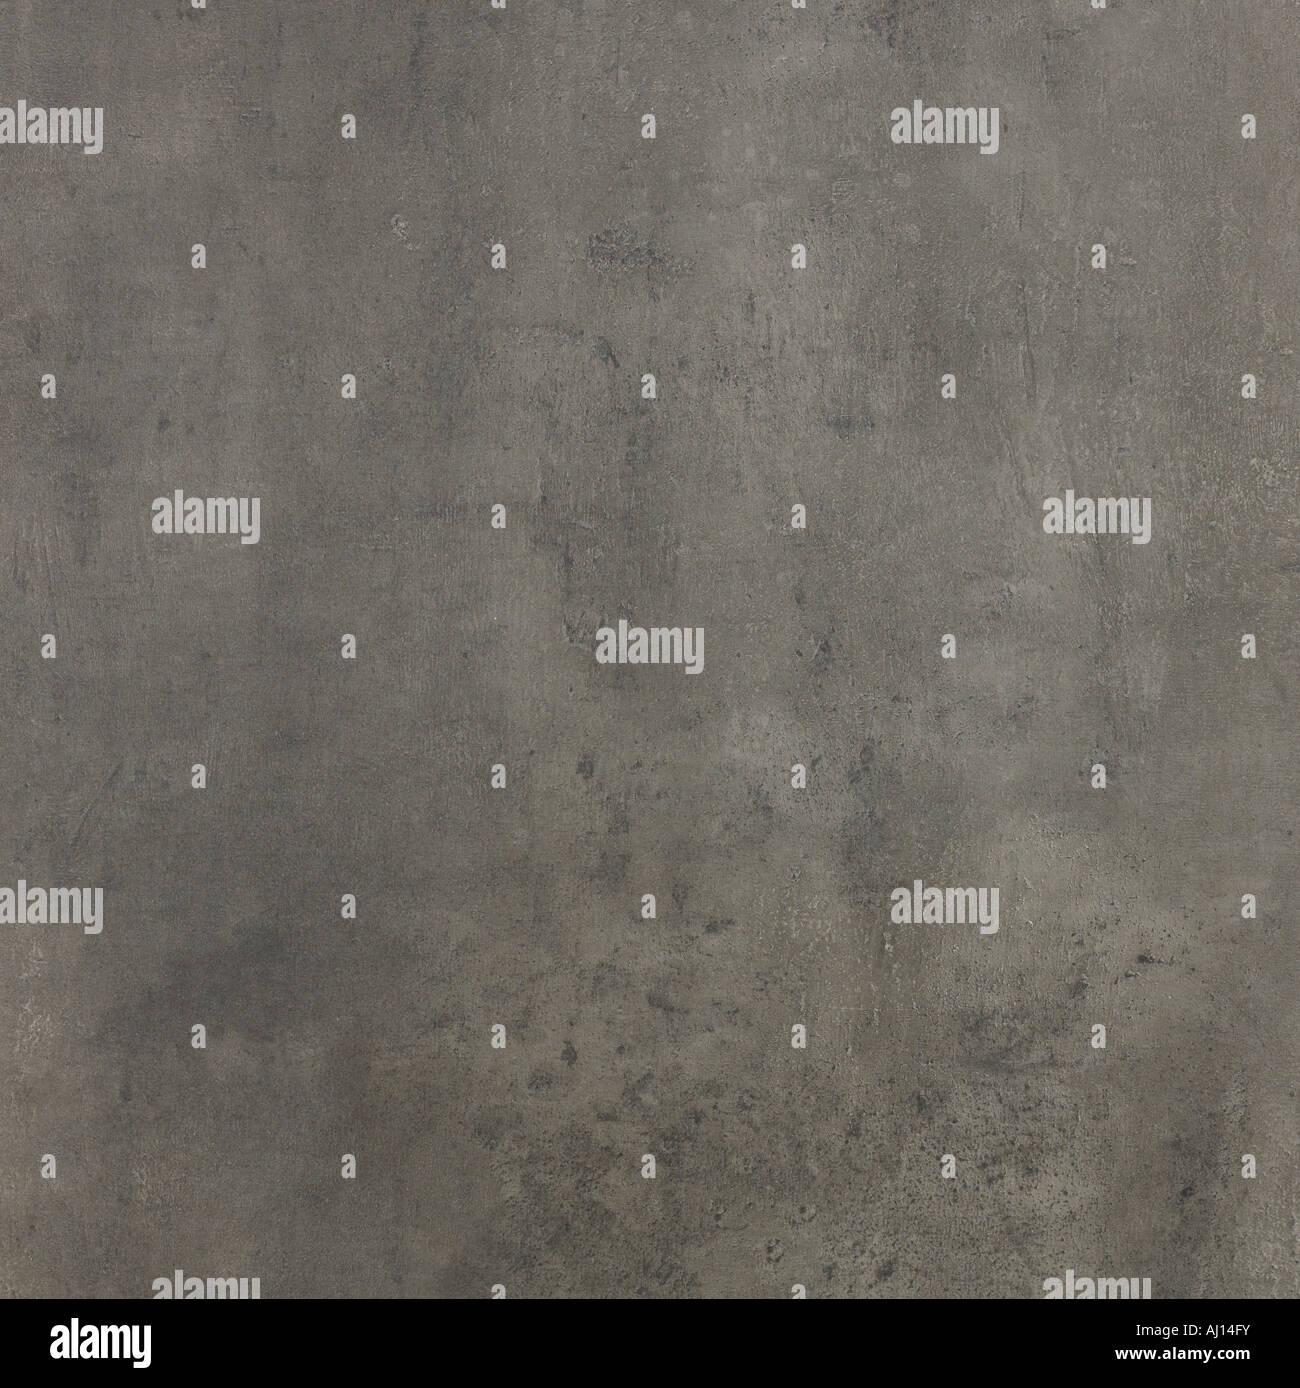 ABSTRACT GREY SLATE PATTERN BACKGROUND Stock Photo